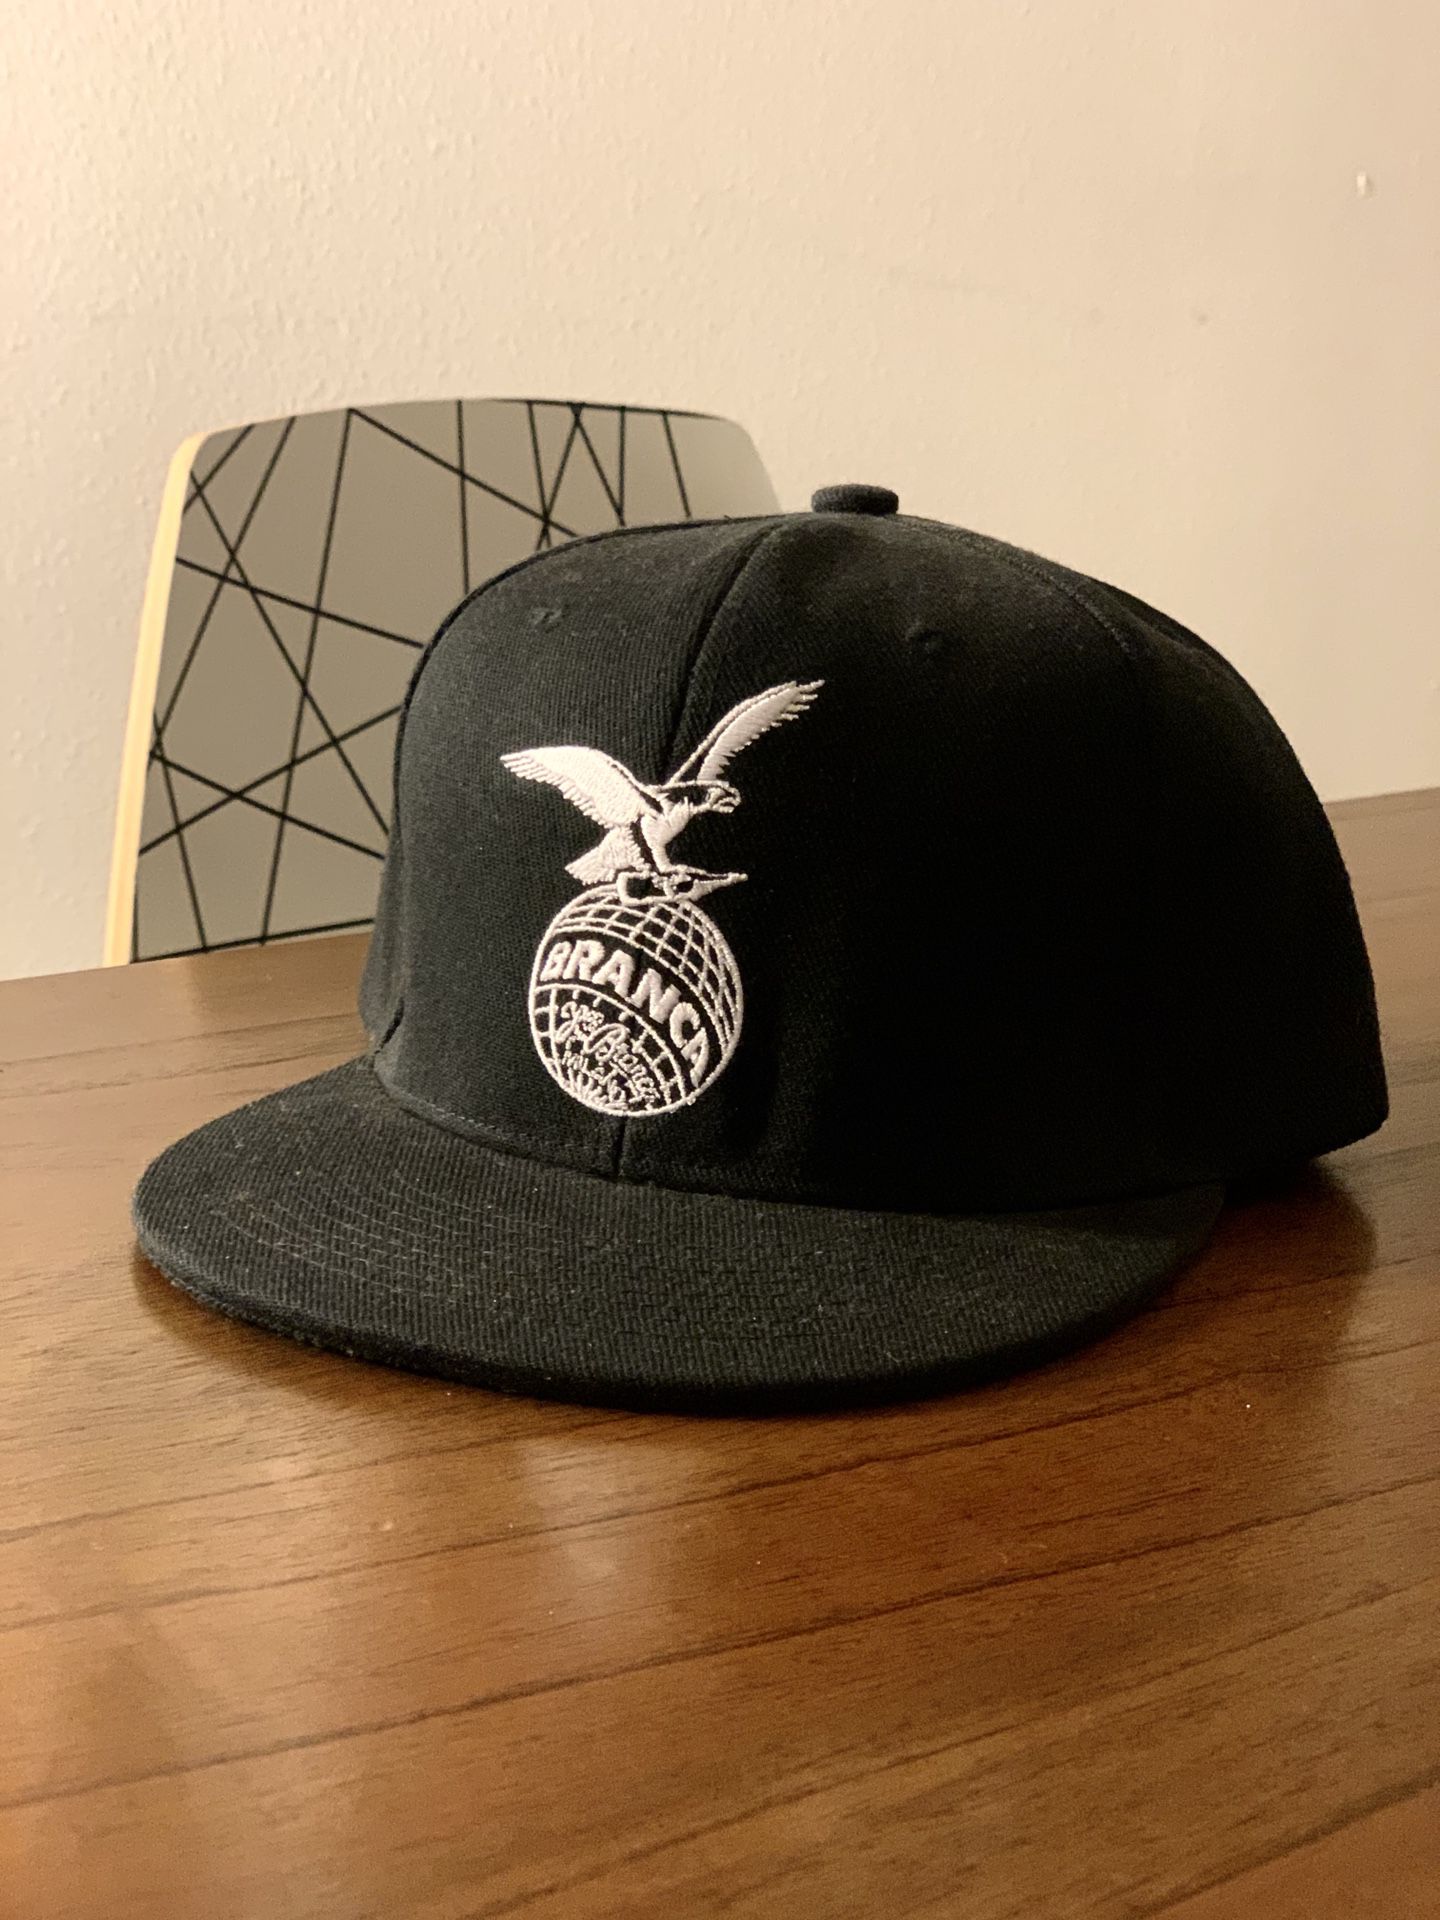 New beautiful hat for Sale in San Diego, CA - OfferUp